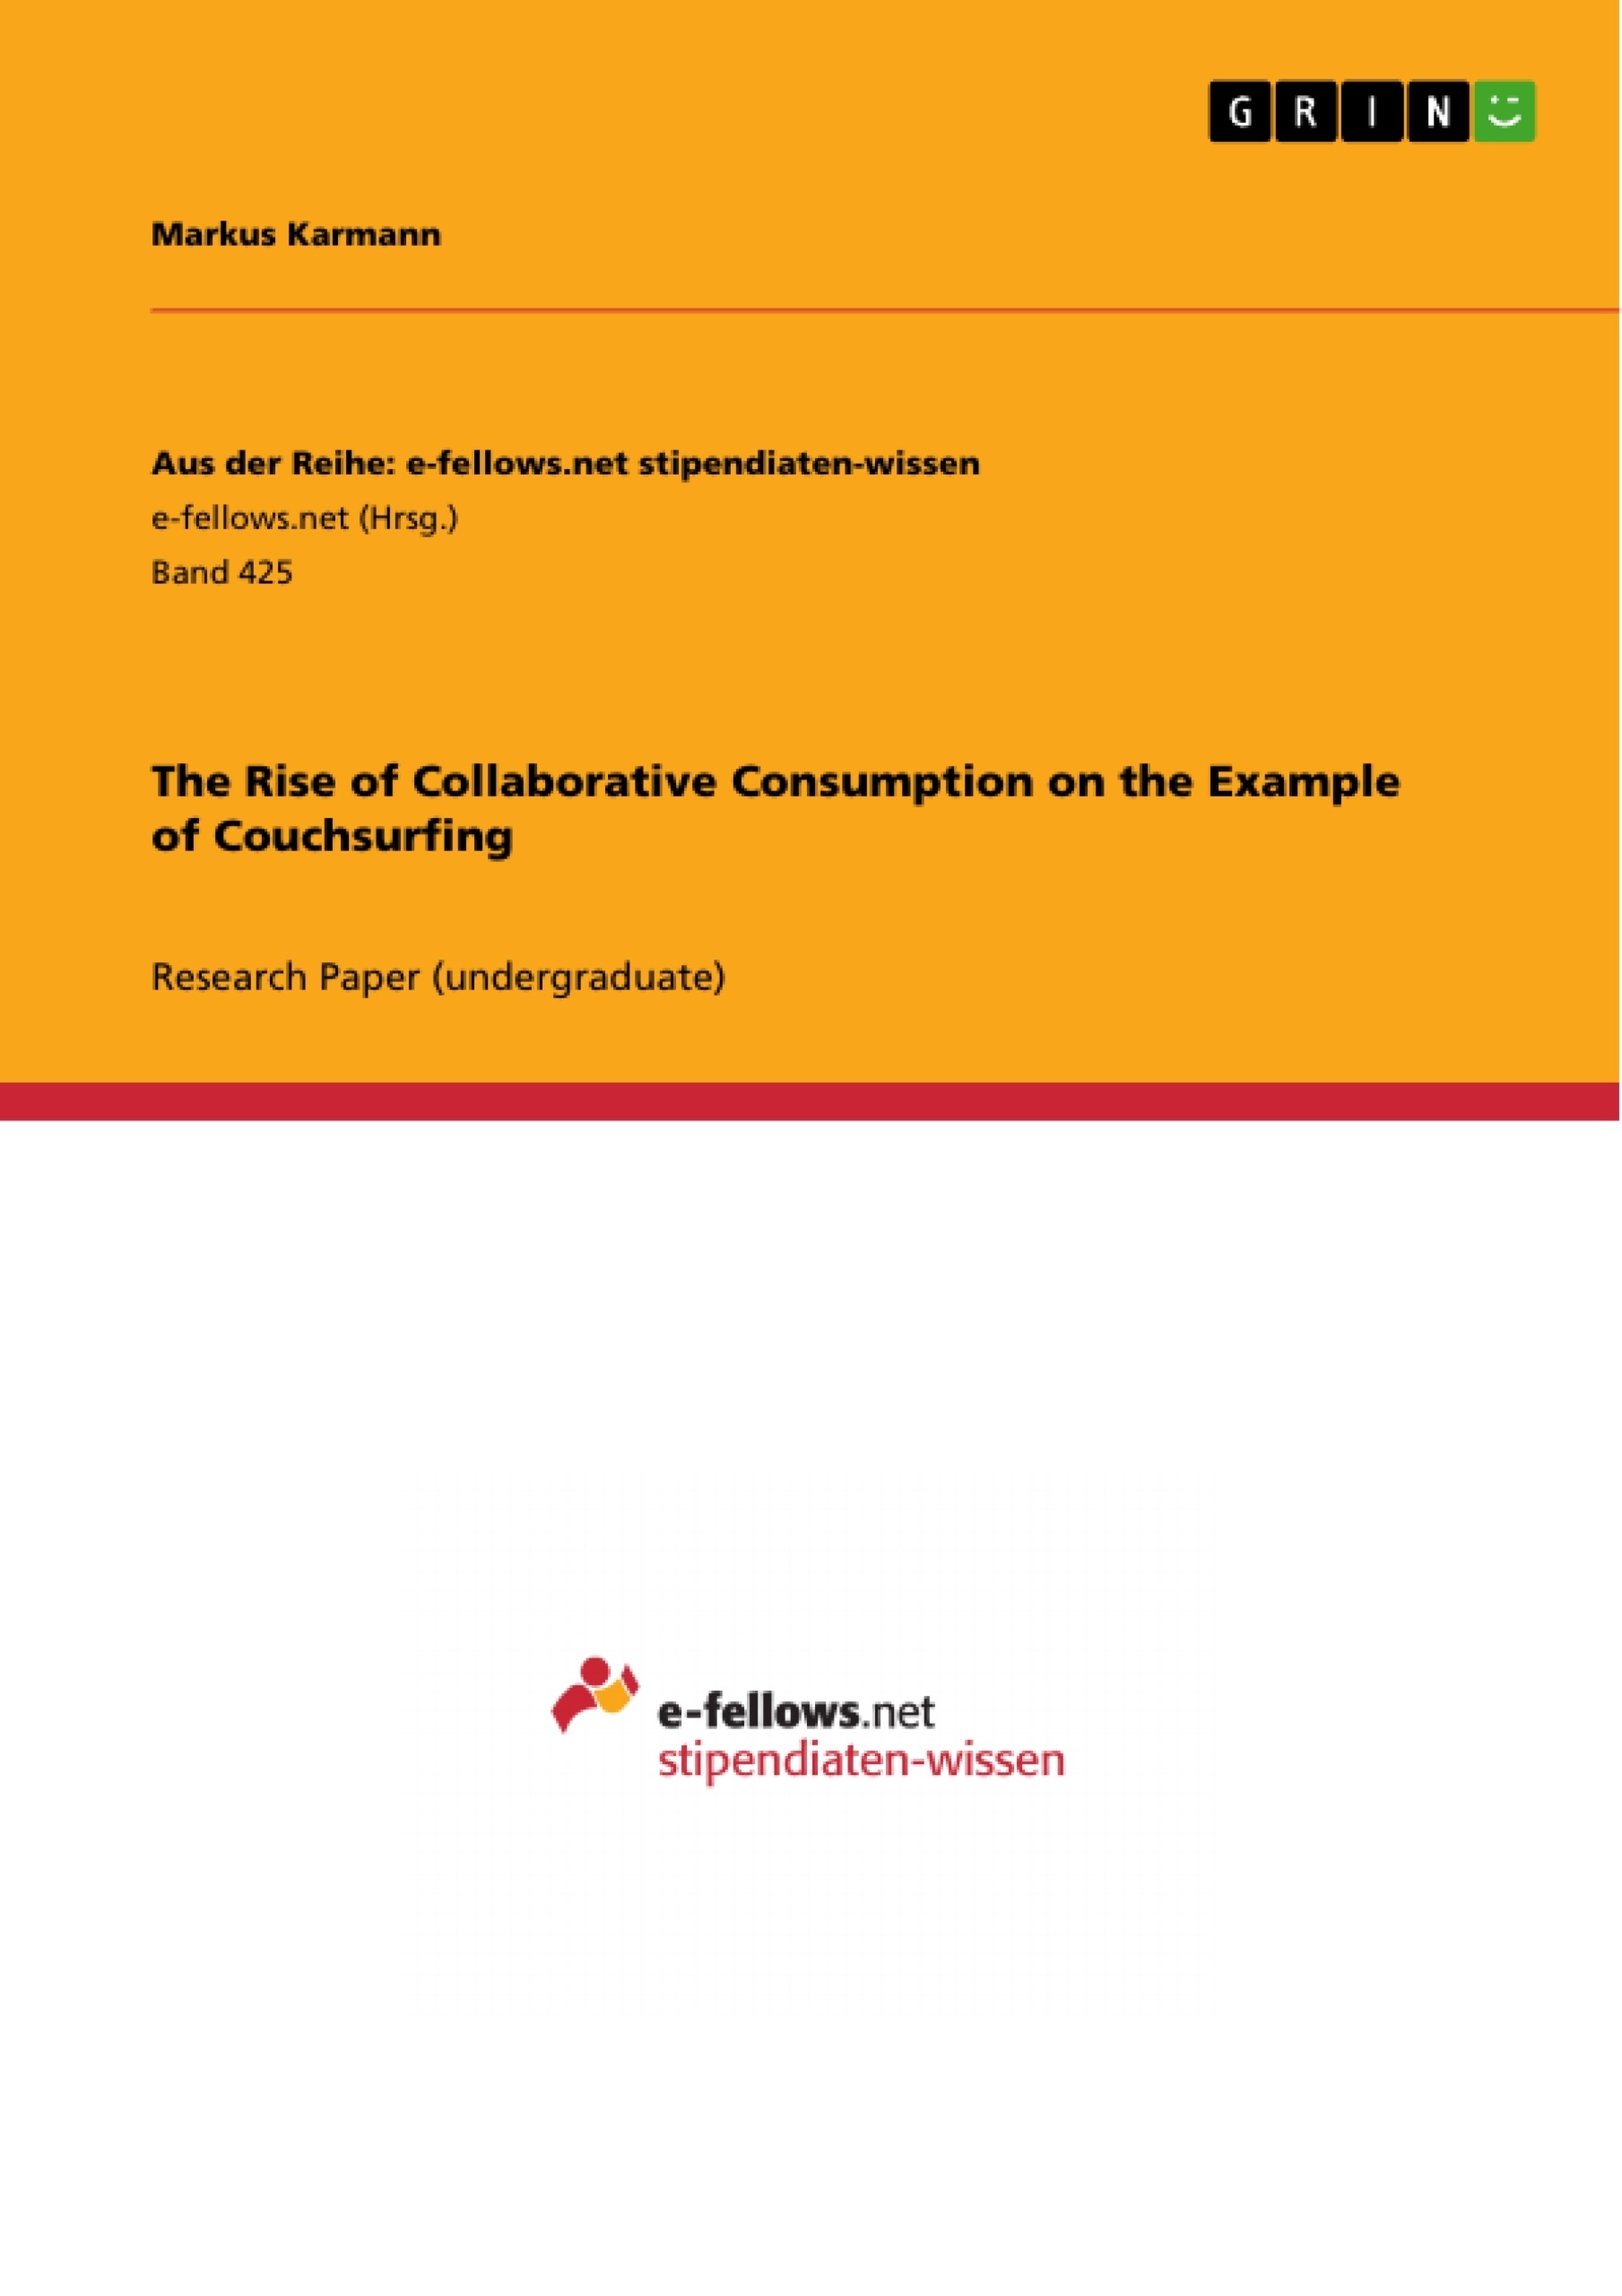 Title: The Rise of Collaborative Consumption on the Example of Couchsurfing